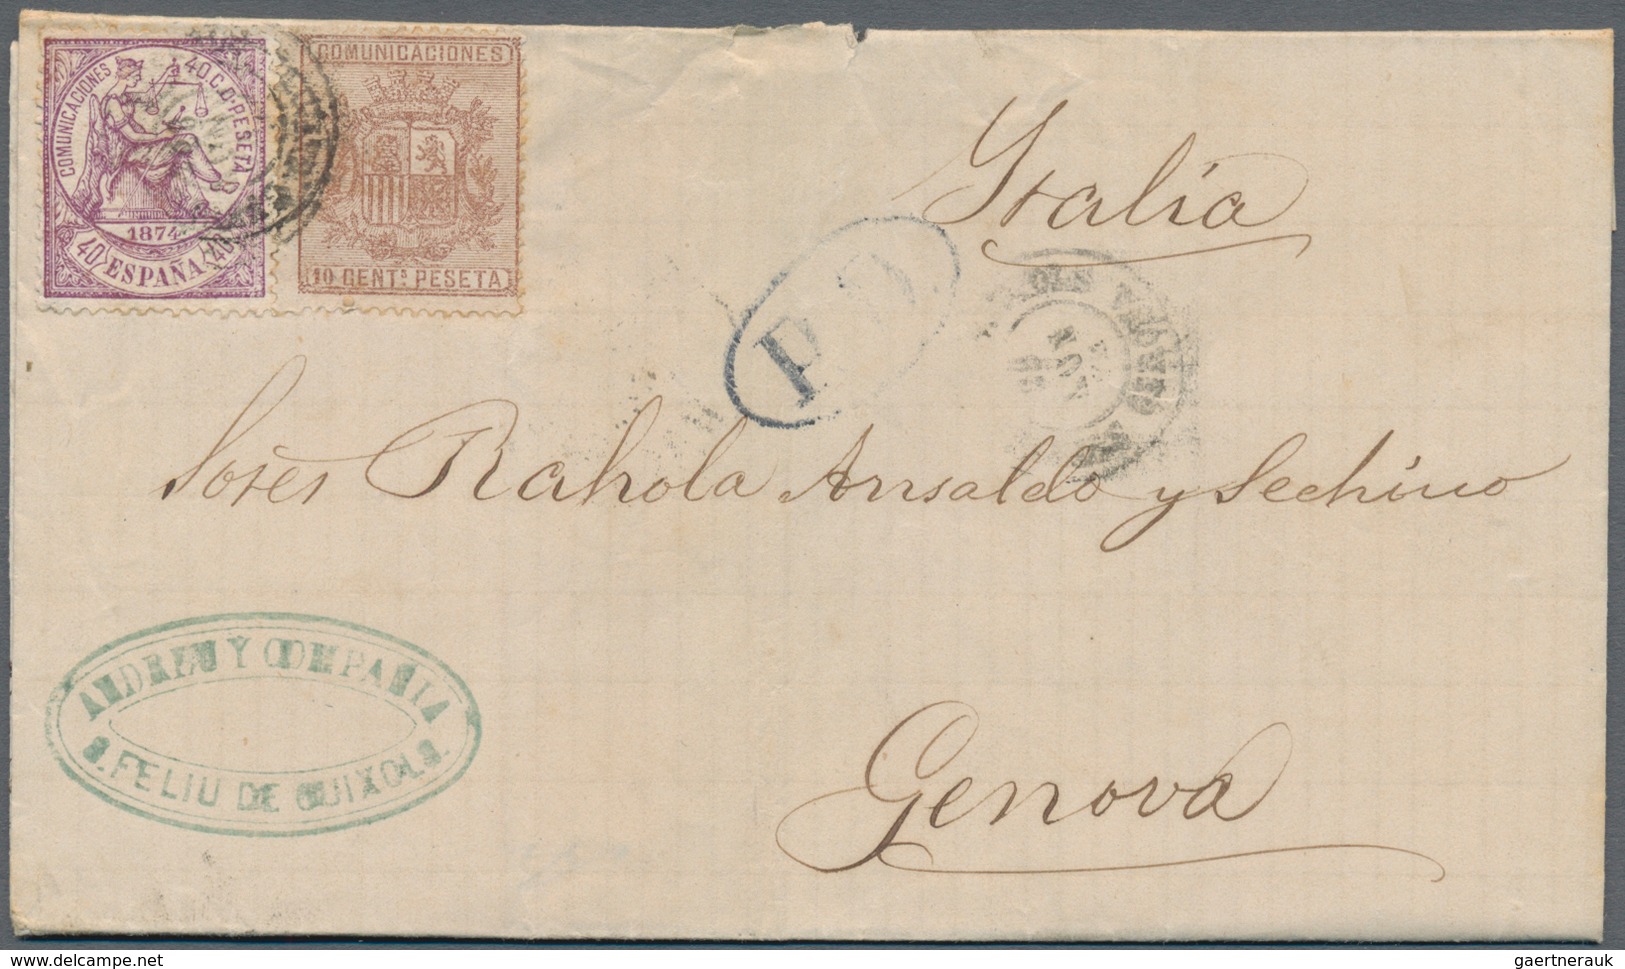 Spanien: 1868/1975 (ca.), sophisticated lot of ca. 110 covers sent from different Spanish locations,